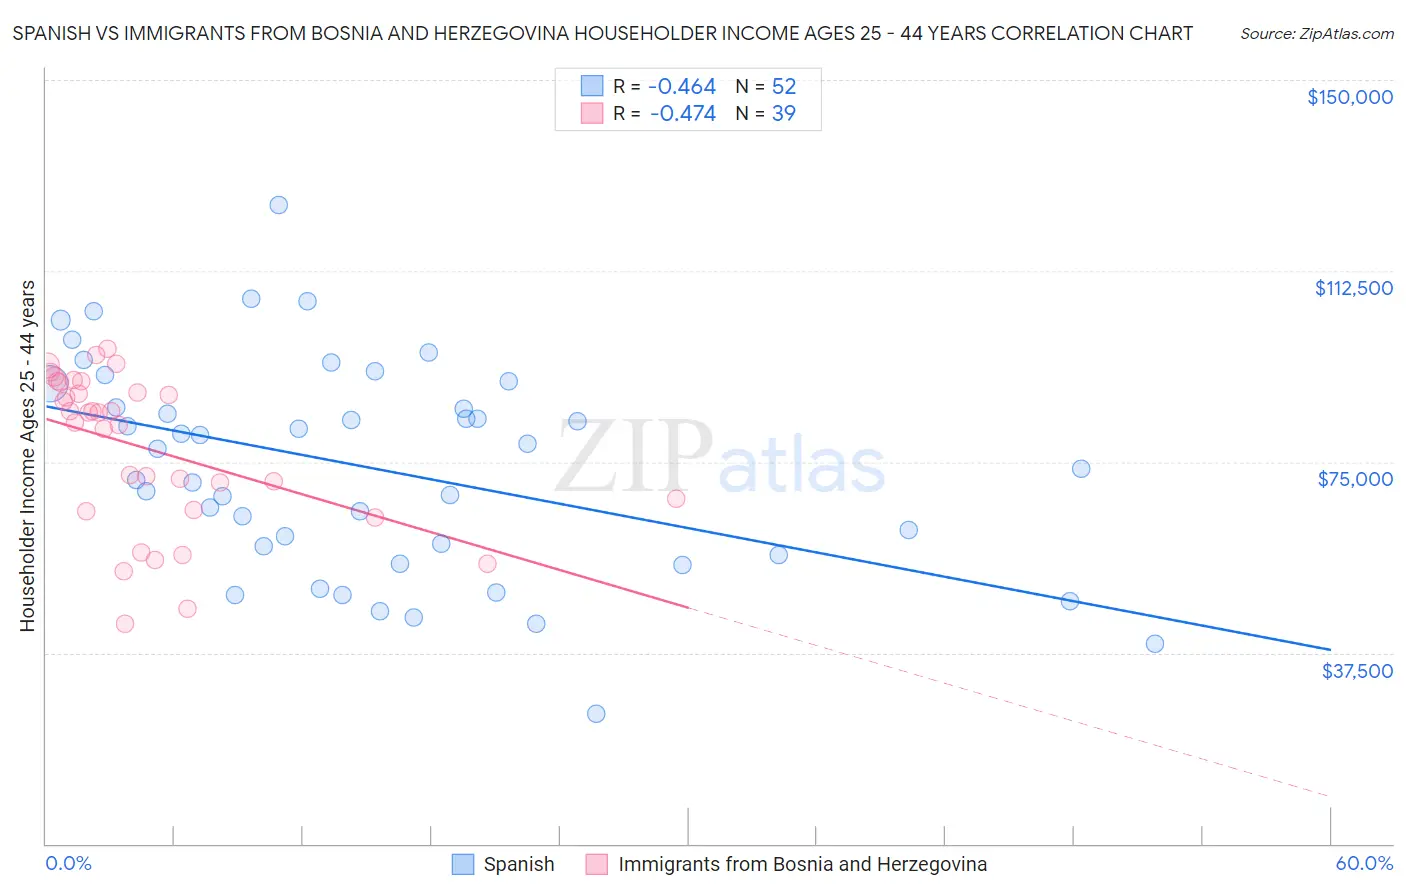 Spanish vs Immigrants from Bosnia and Herzegovina Householder Income Ages 25 - 44 years